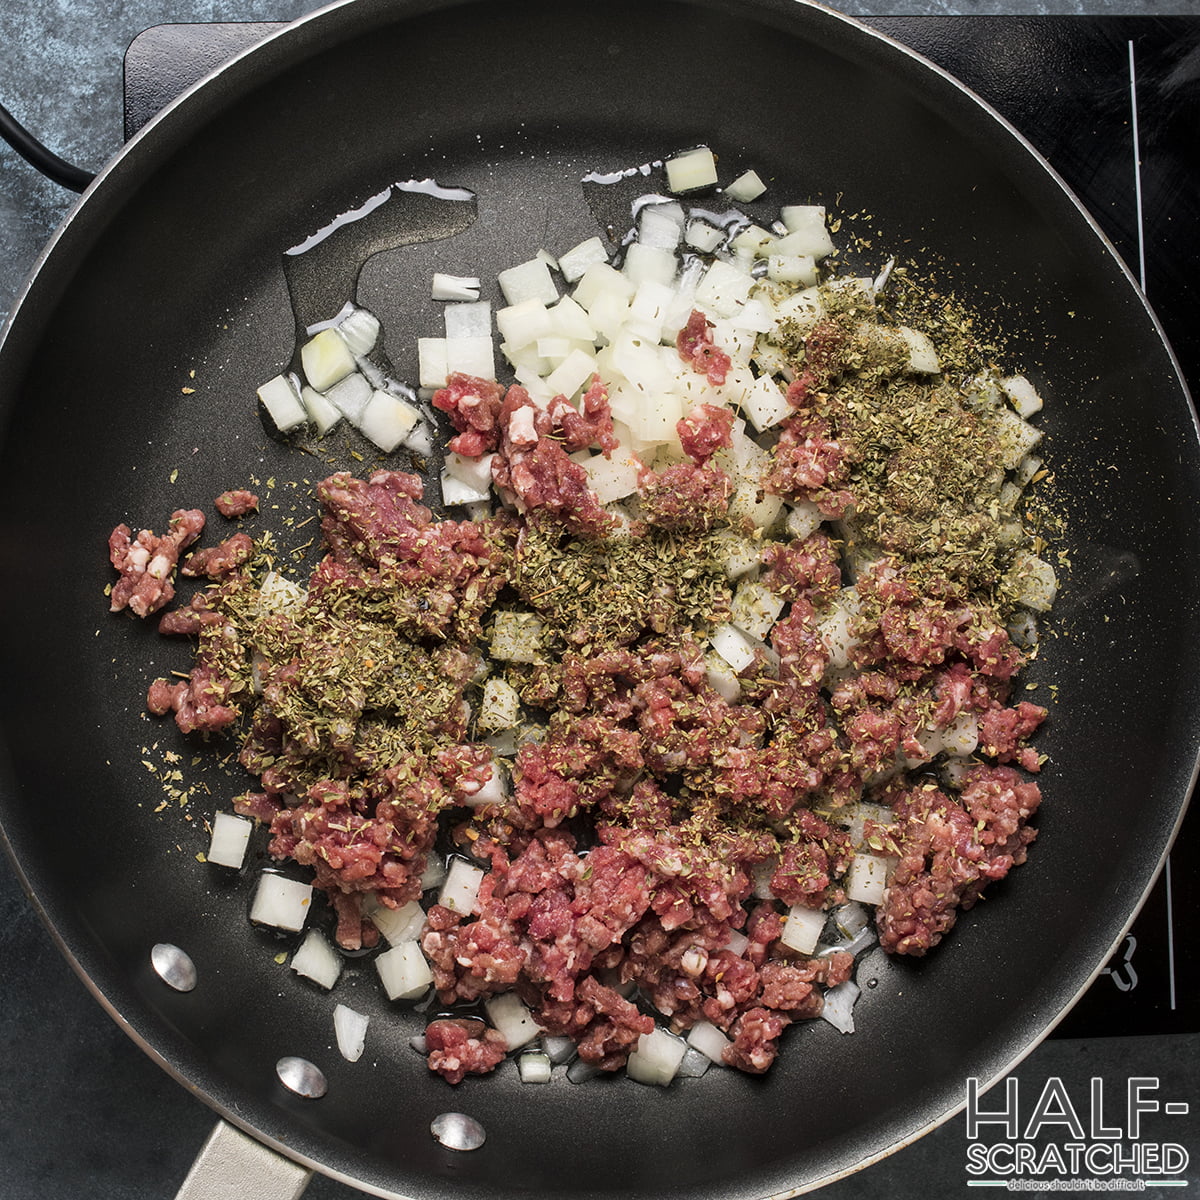 Sautéing onion with ground meat